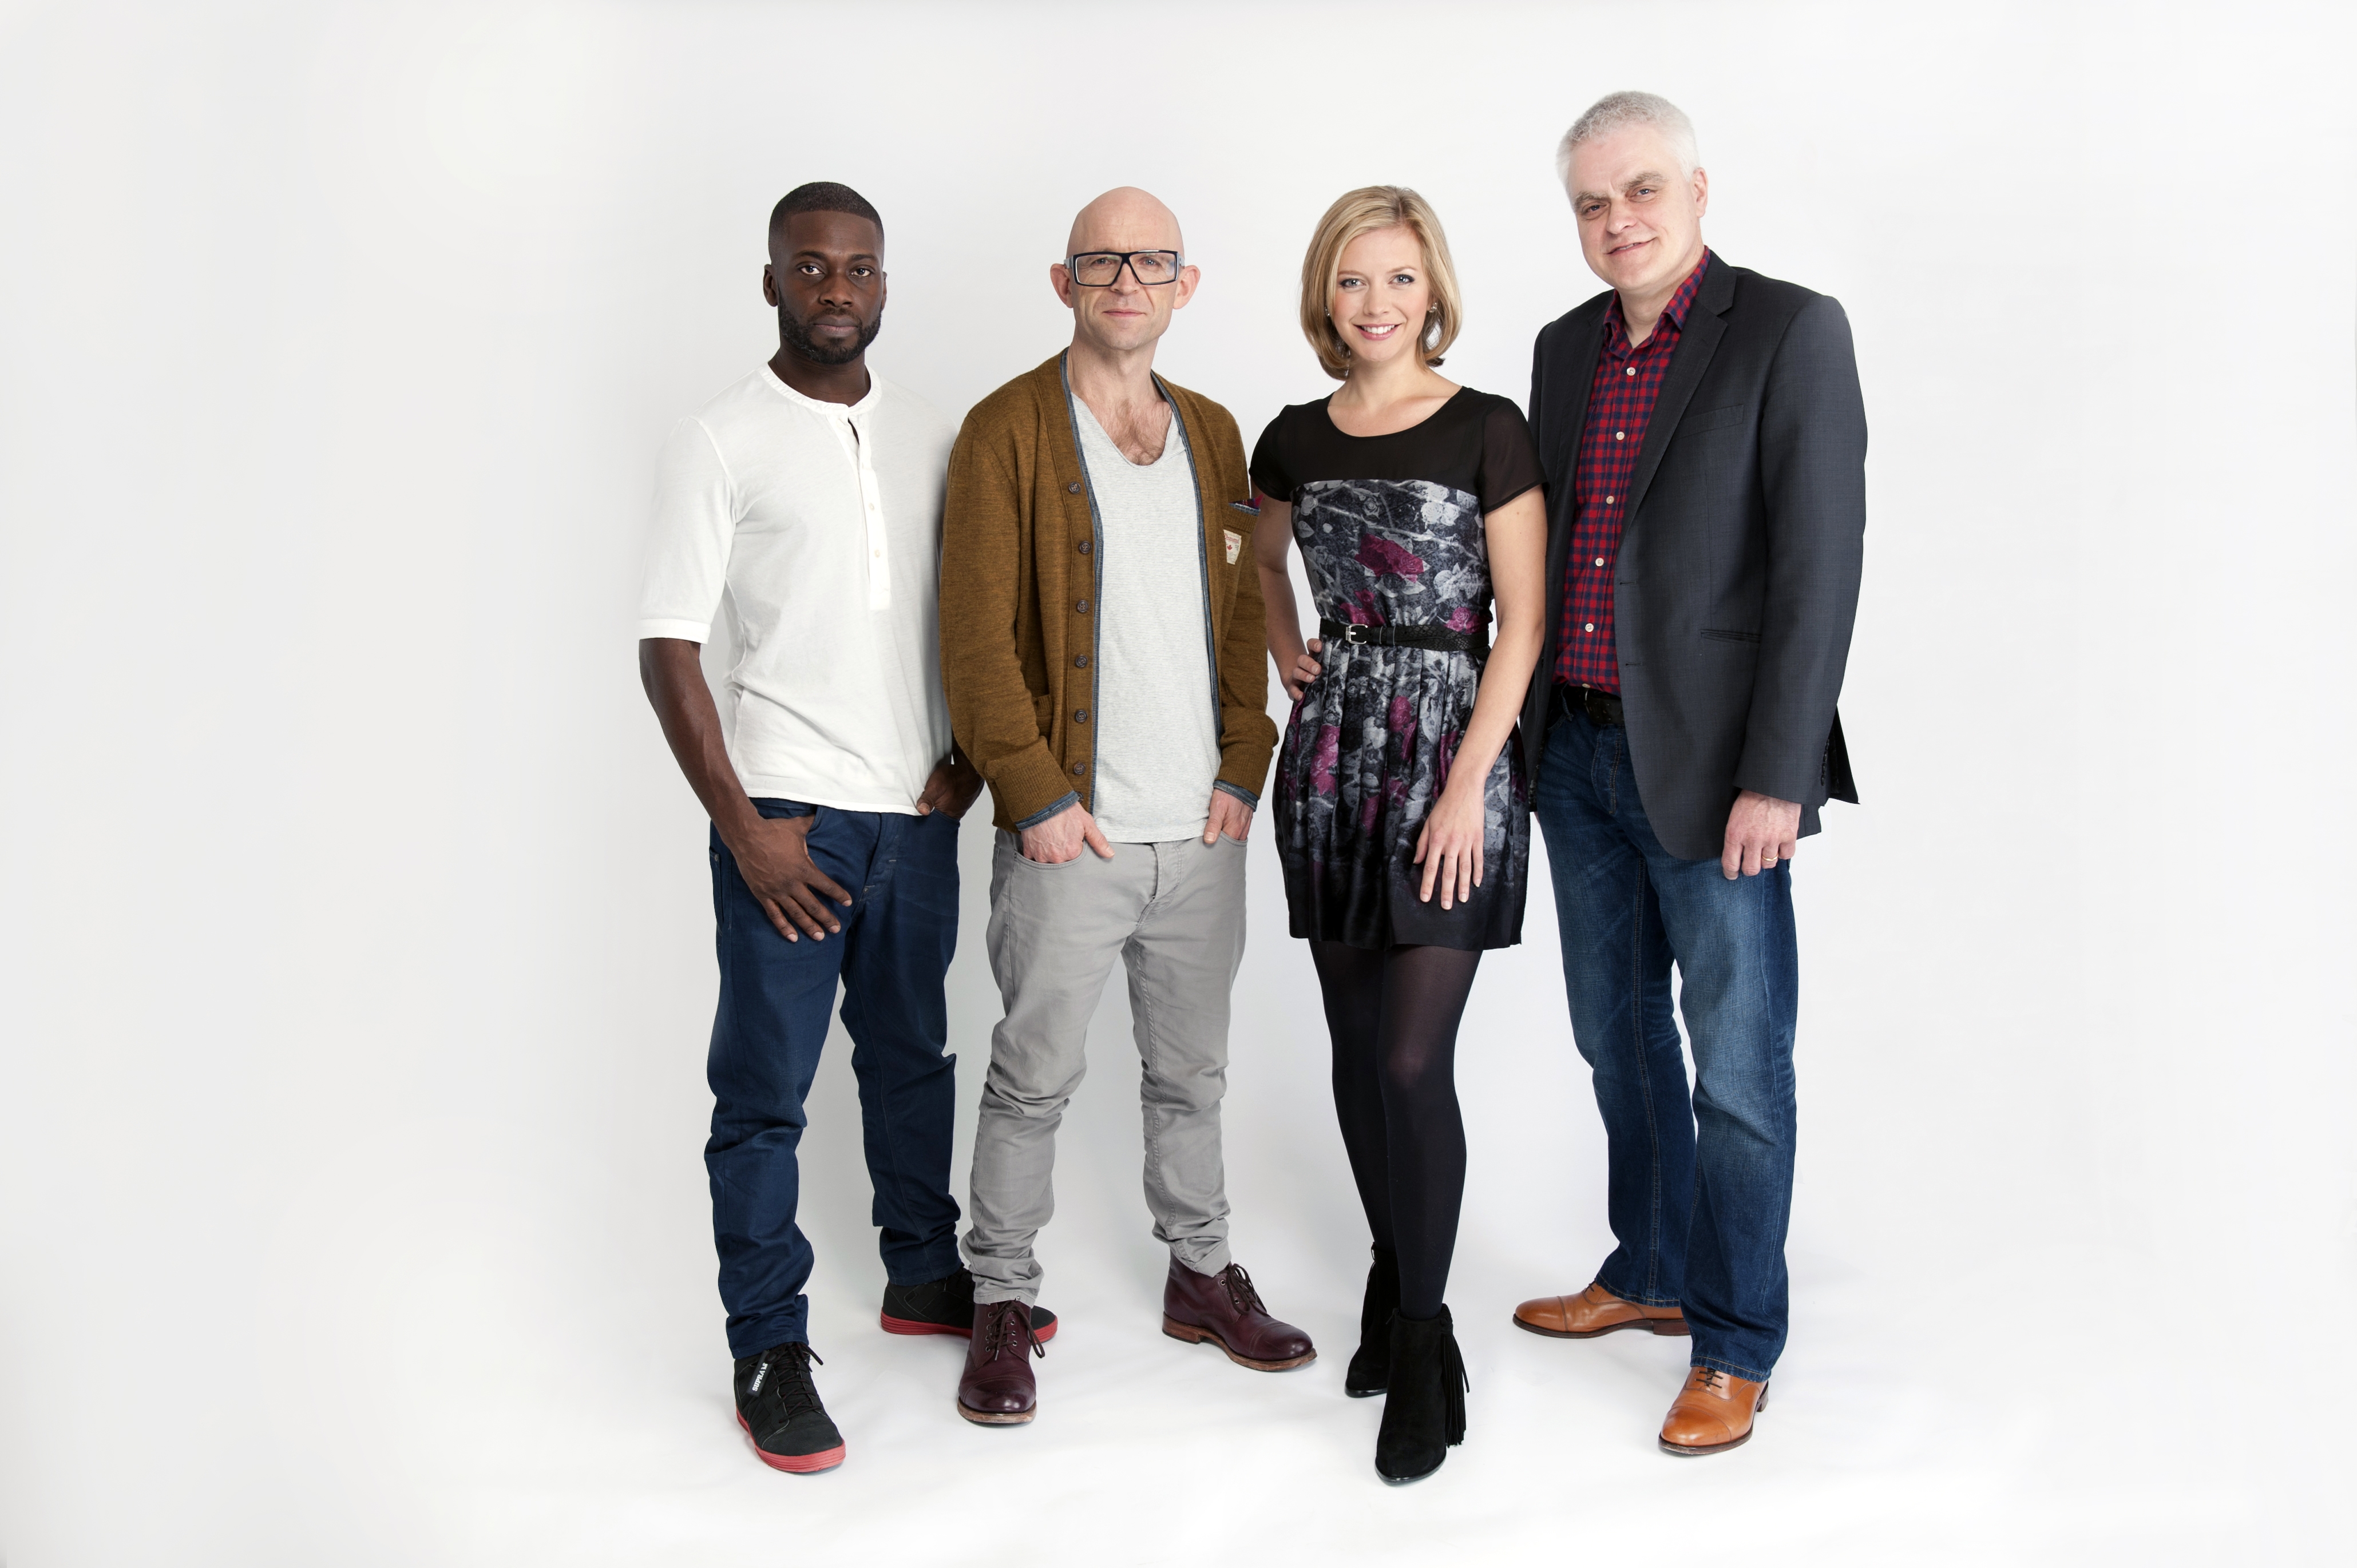 All four presenters from the new line-up of The Gadget Show will appear together on stage at the Gadget Show Live this April.